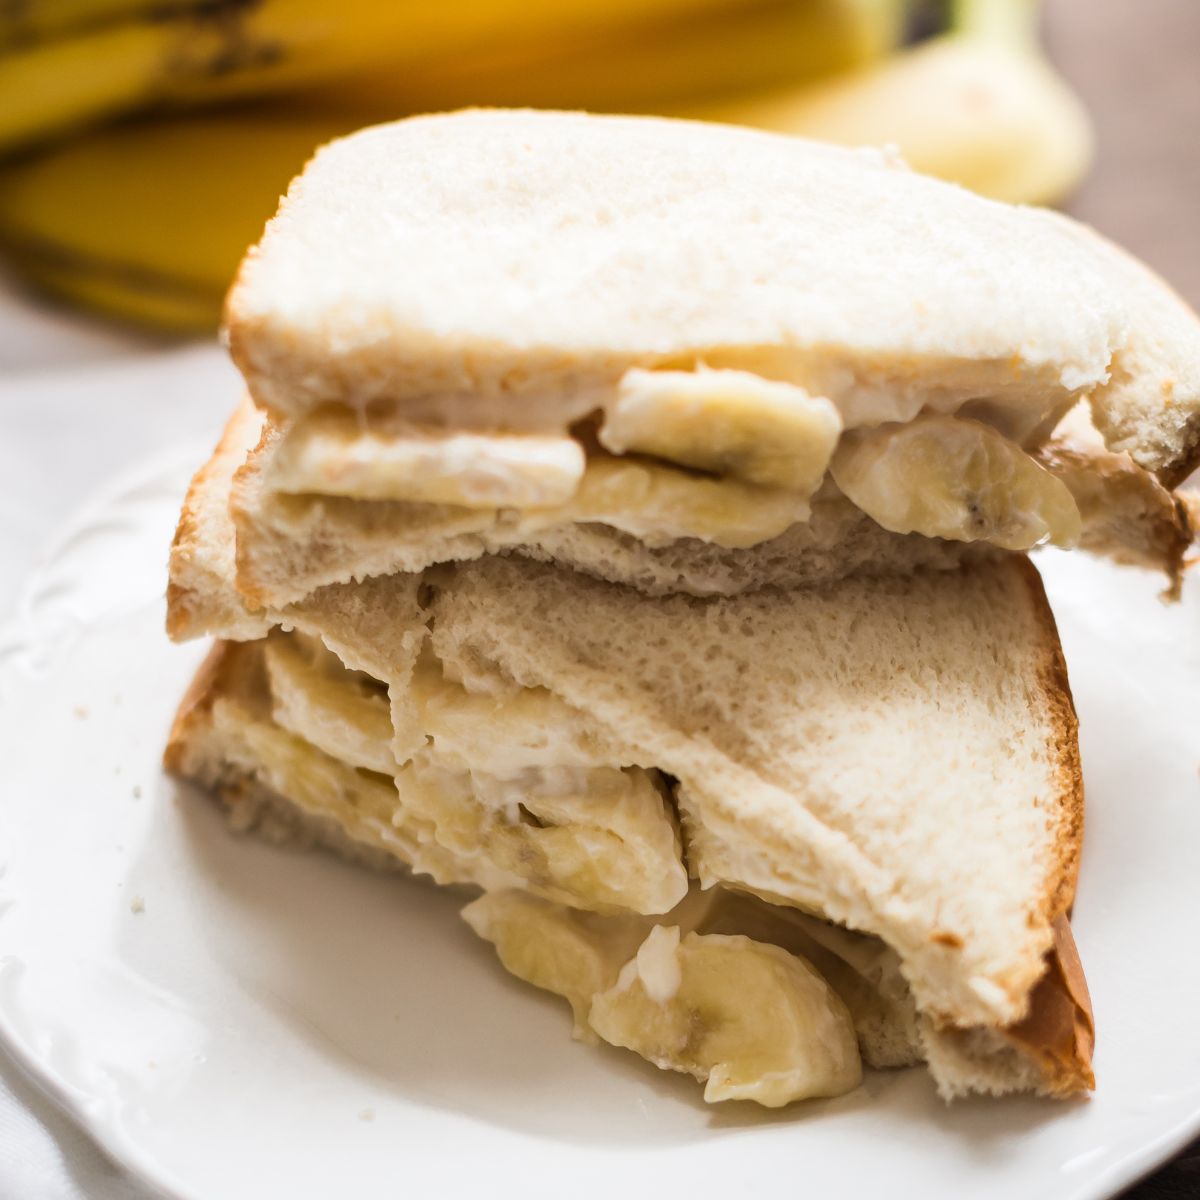 How to Make a Banana Sandwich the Southern Way